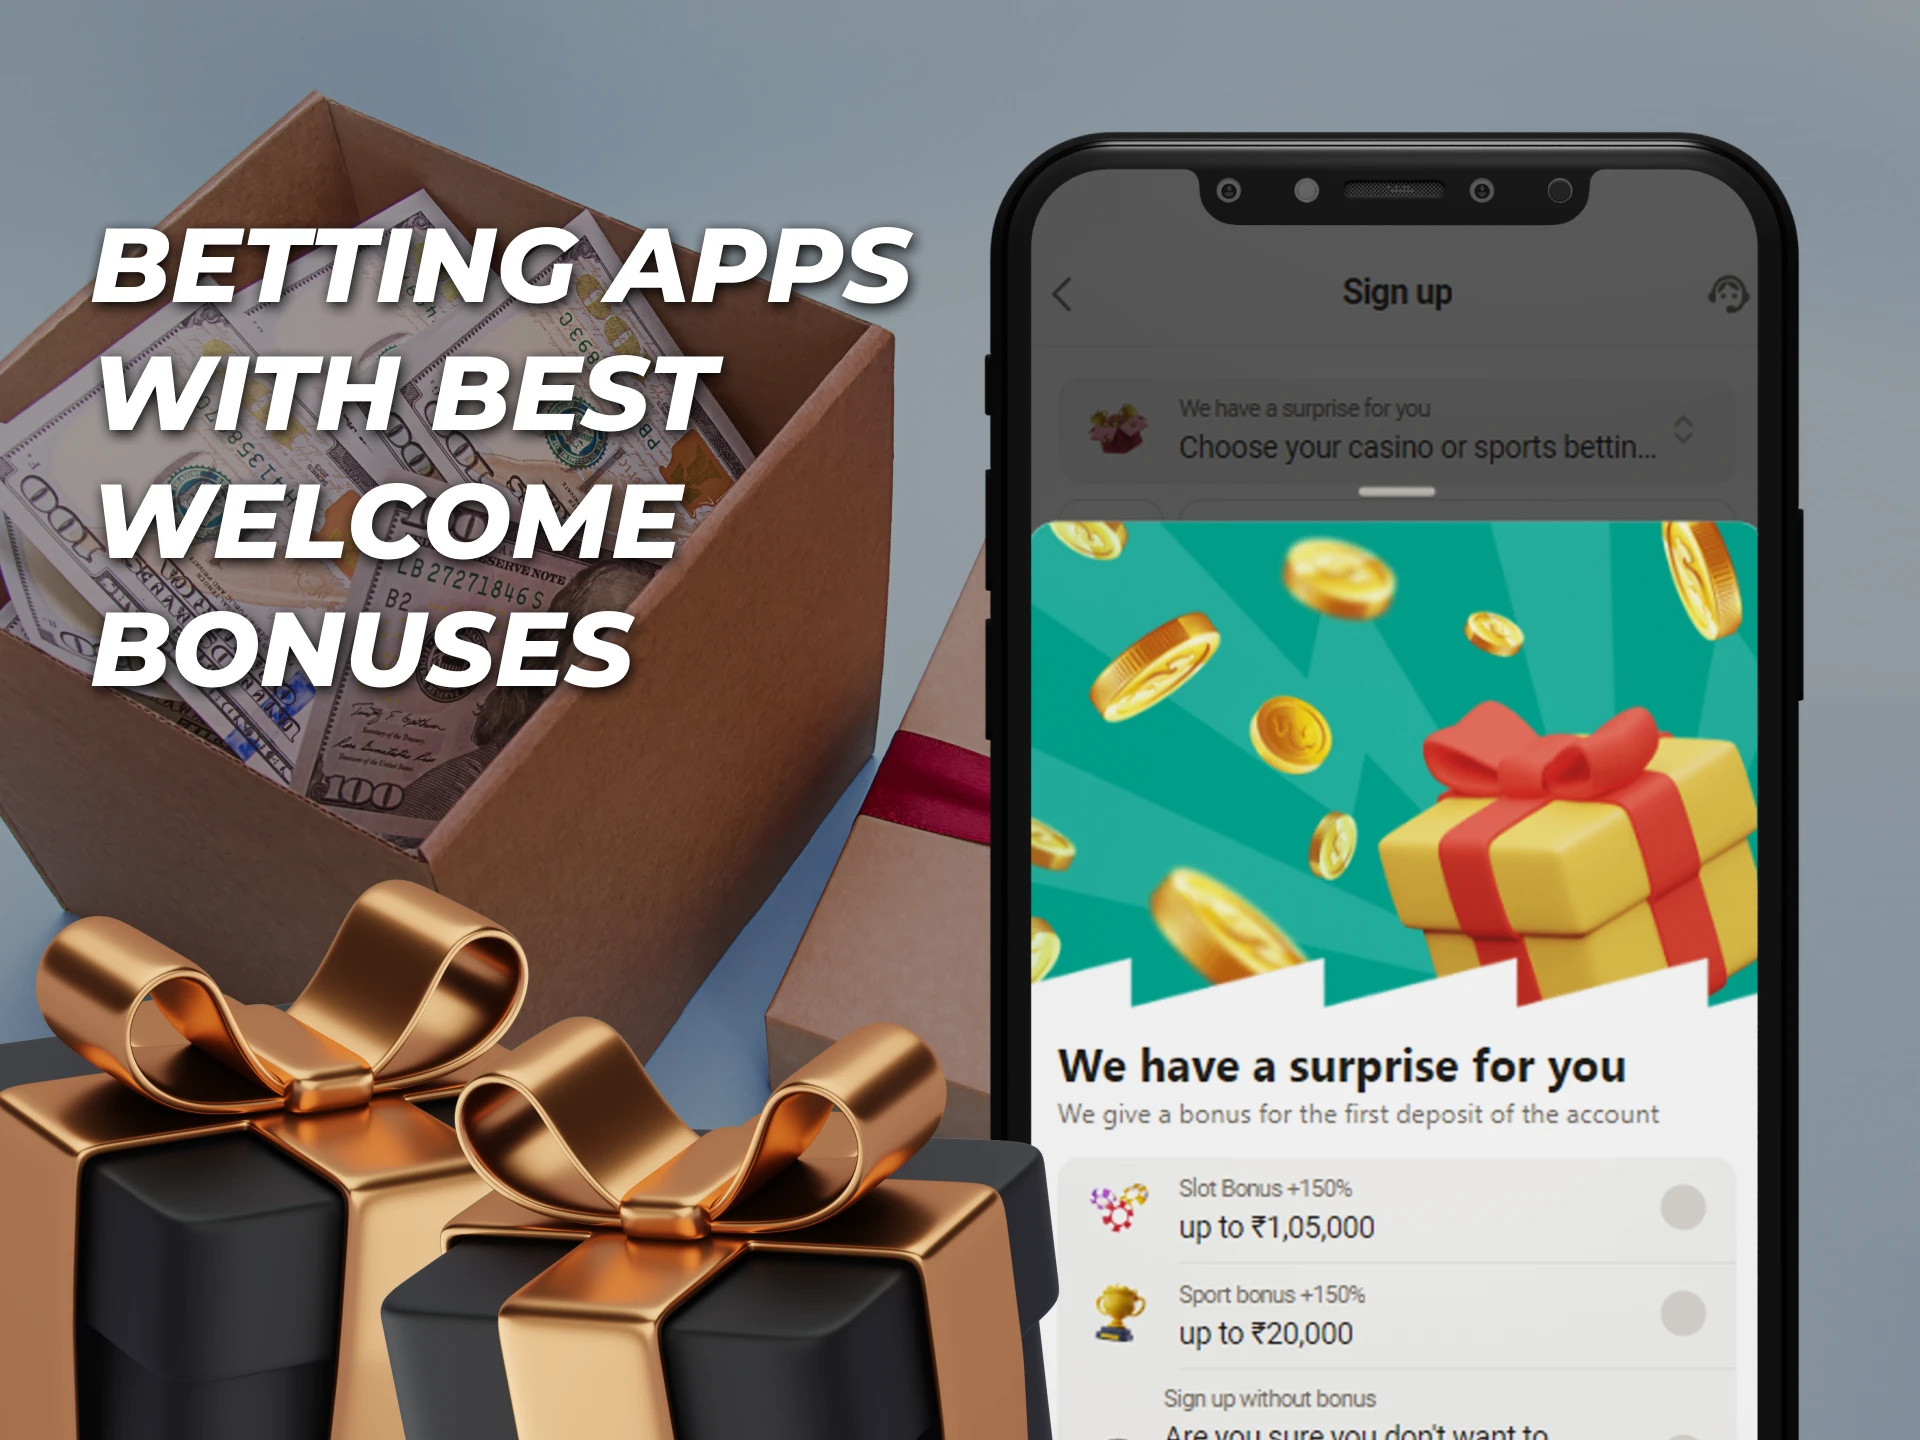 Get a nice welcome bonus on these betting apps.